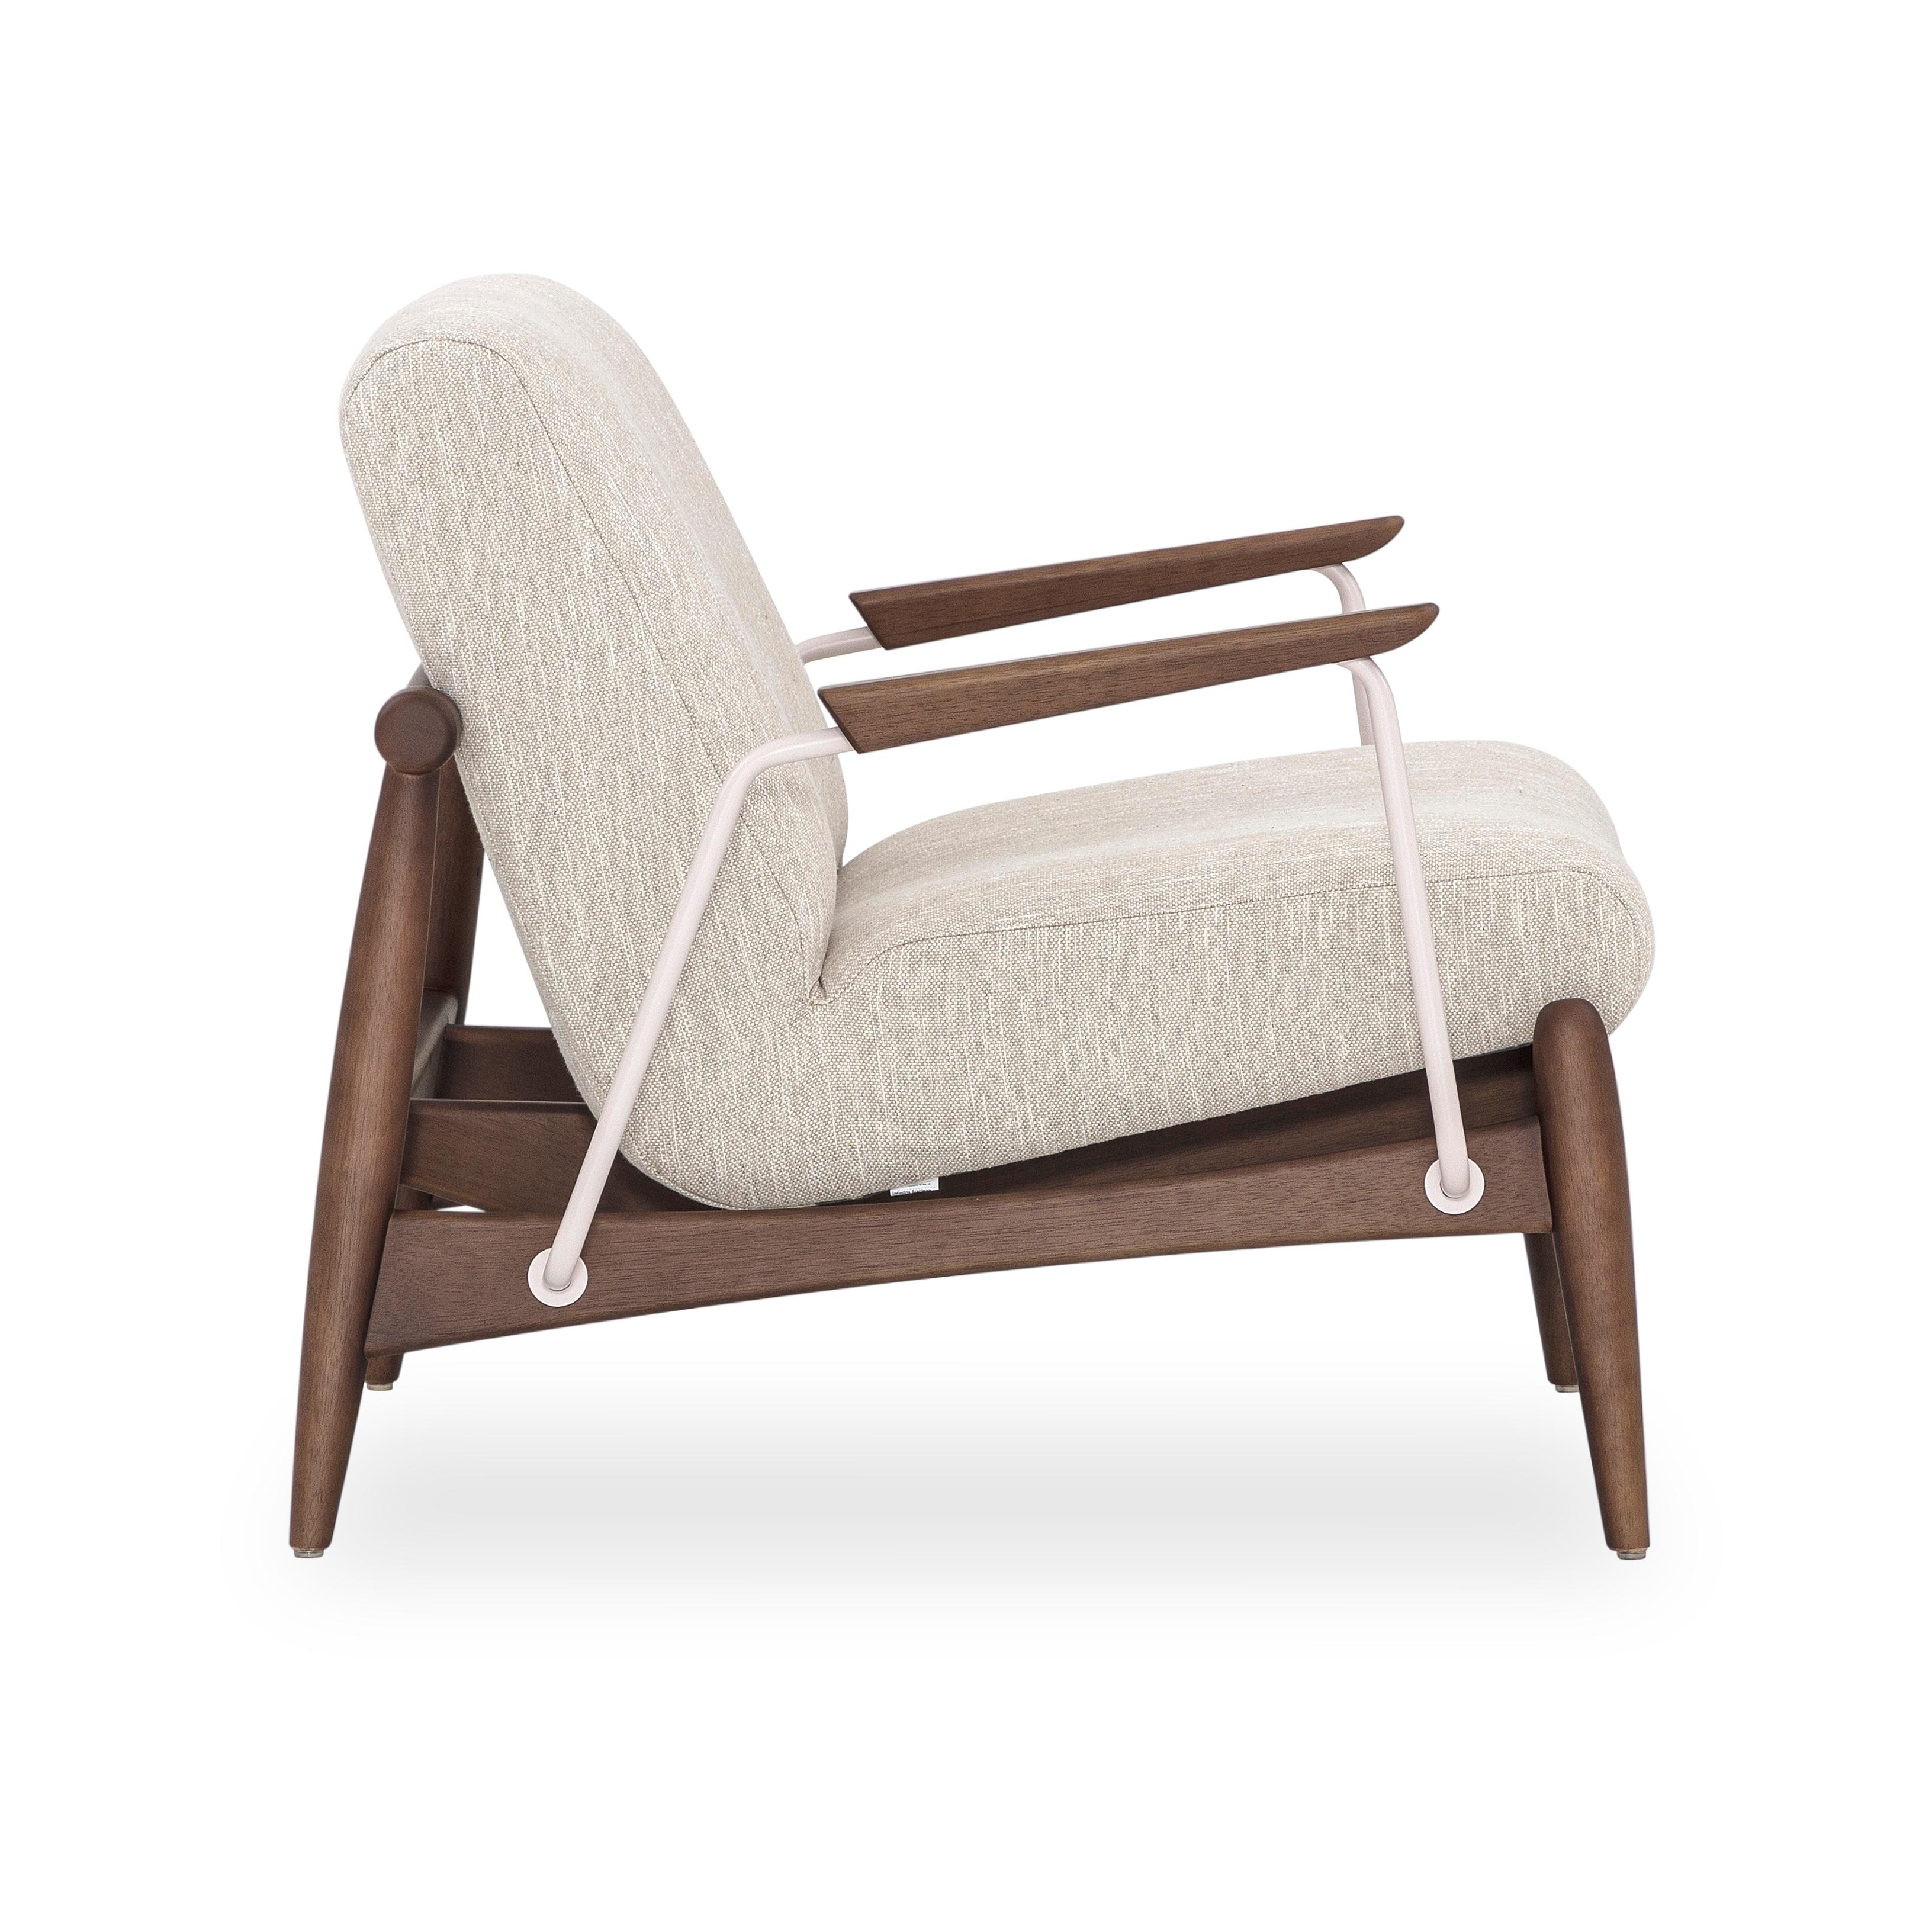 The Win armchair features metal trimmings with a walnut wood finish frame, wrapped in a beautiful ivory fabric. Our amazing Uultis design team has created this armchair for your comfort and support, that you can place in any room of your house. It